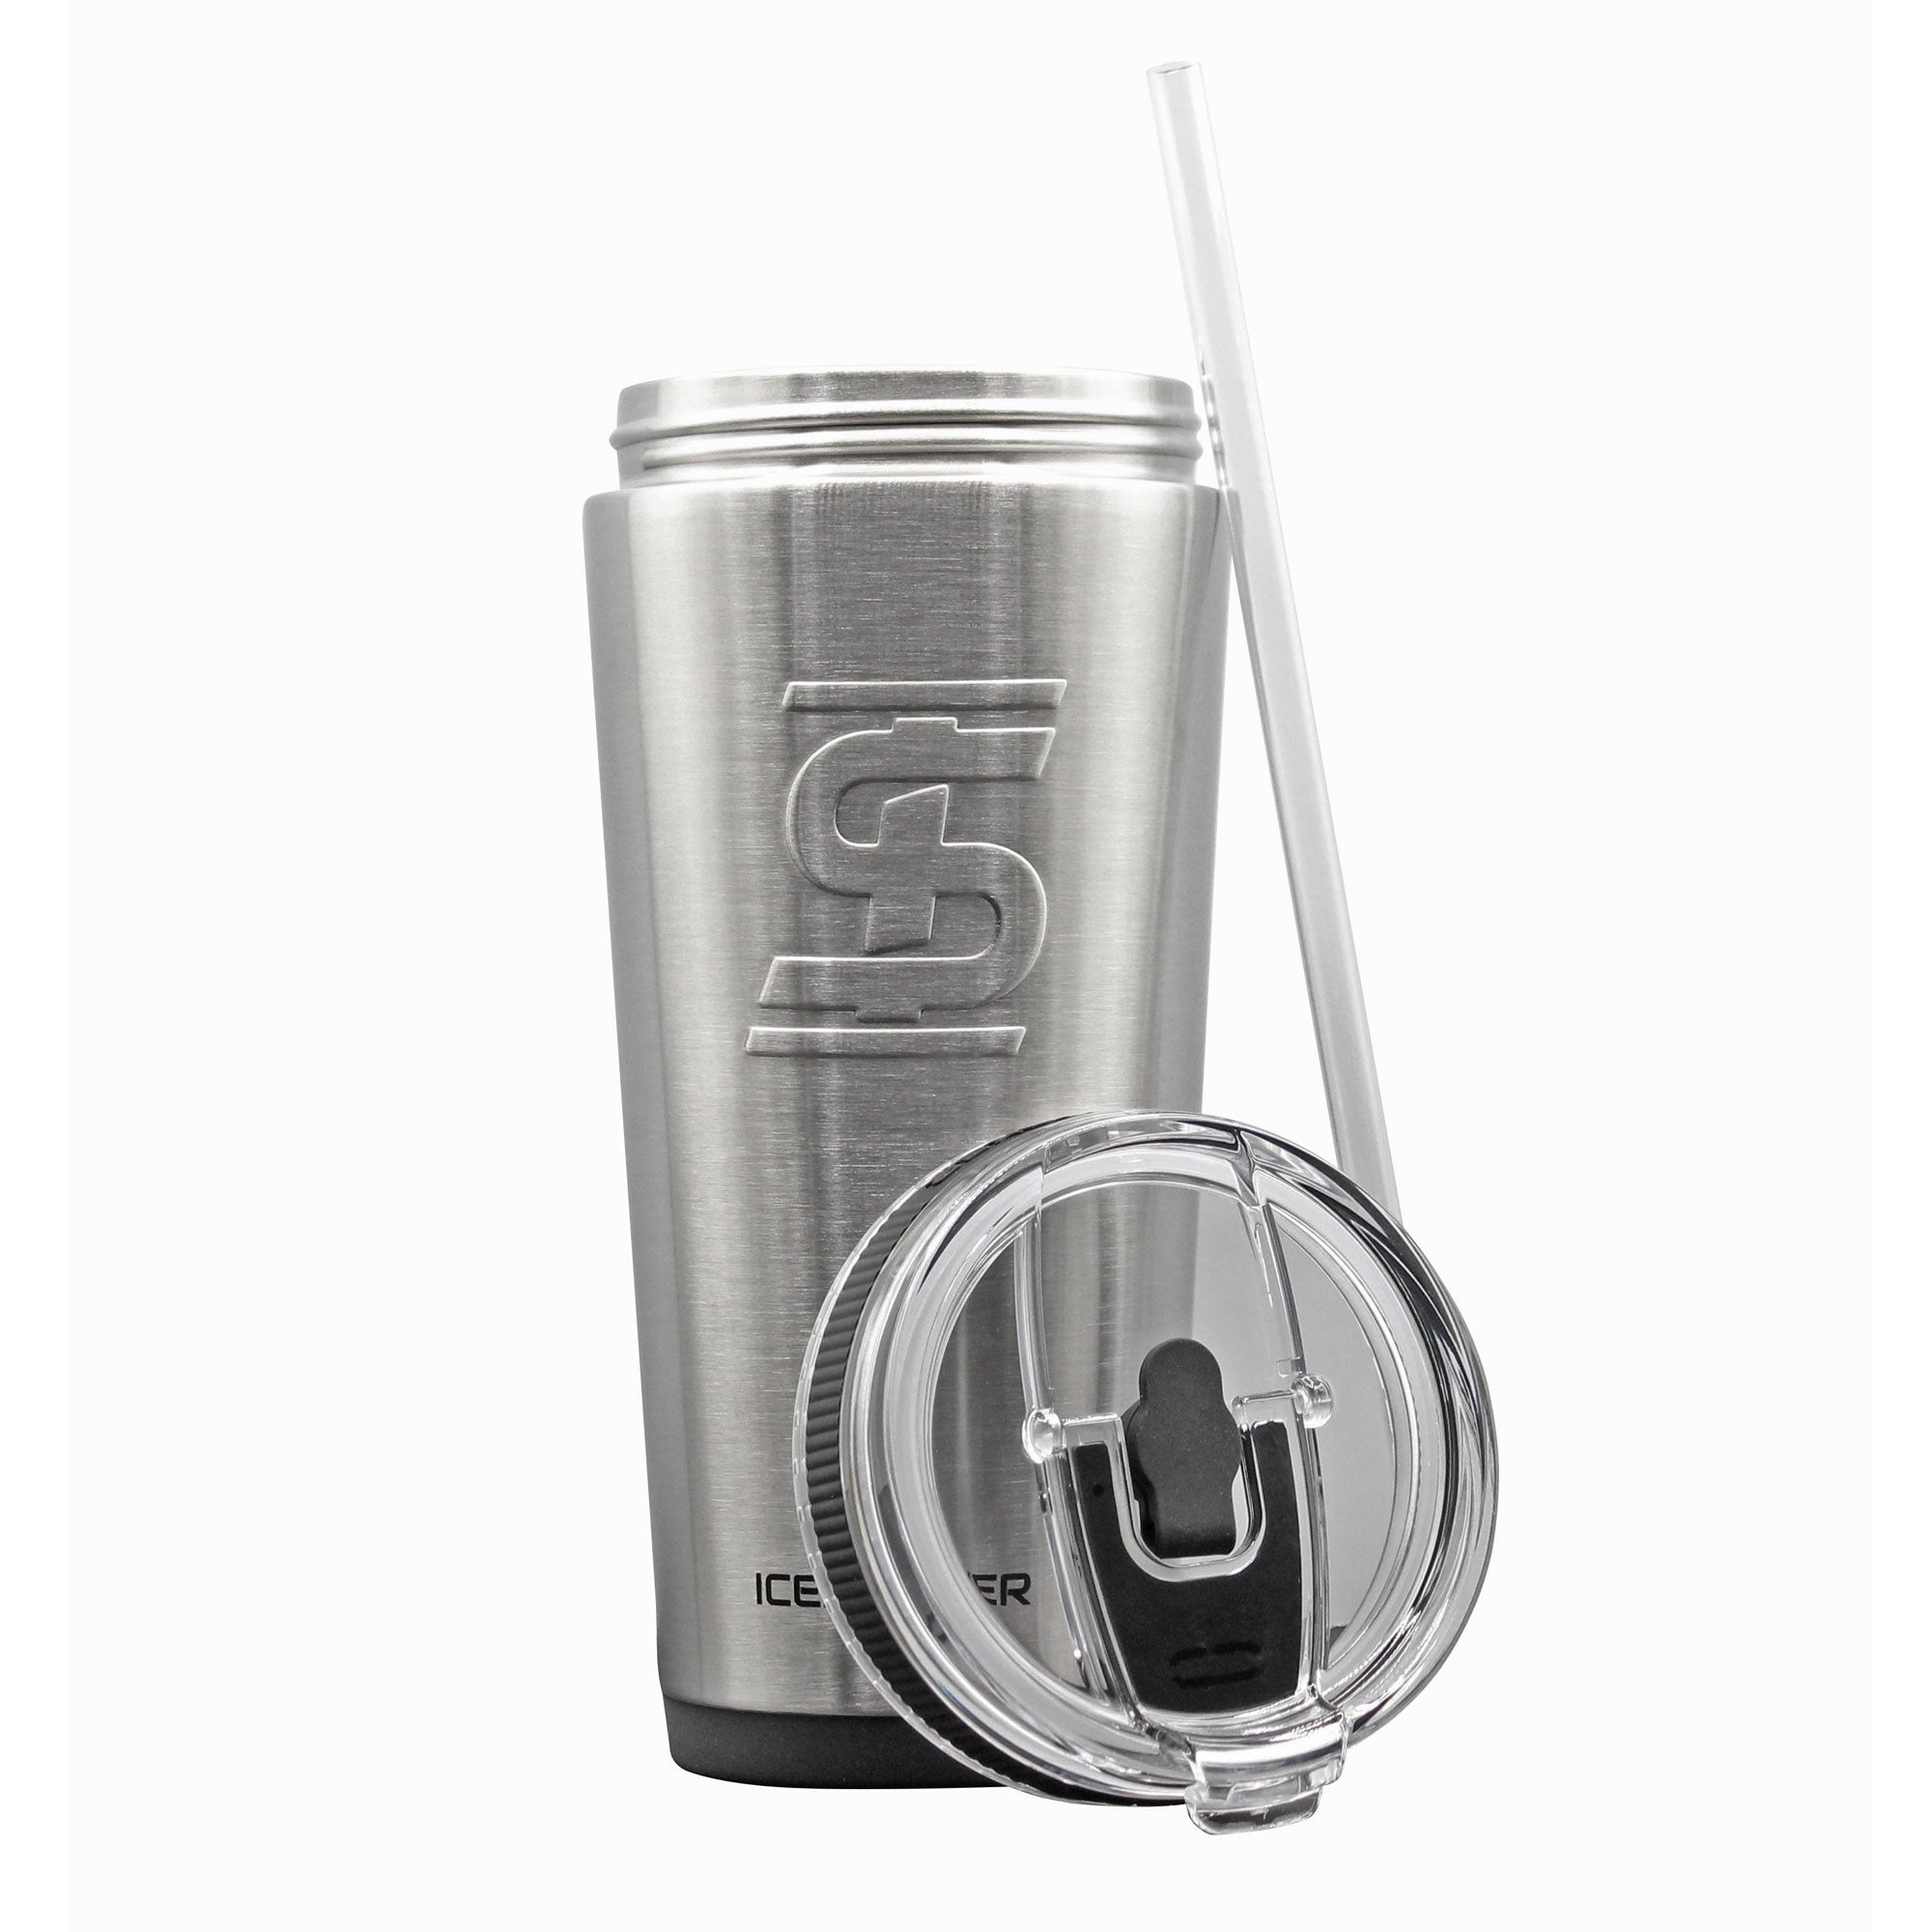 Official NFL Green Bay Packers 26oz Insulated Bottle | Ice Shaker